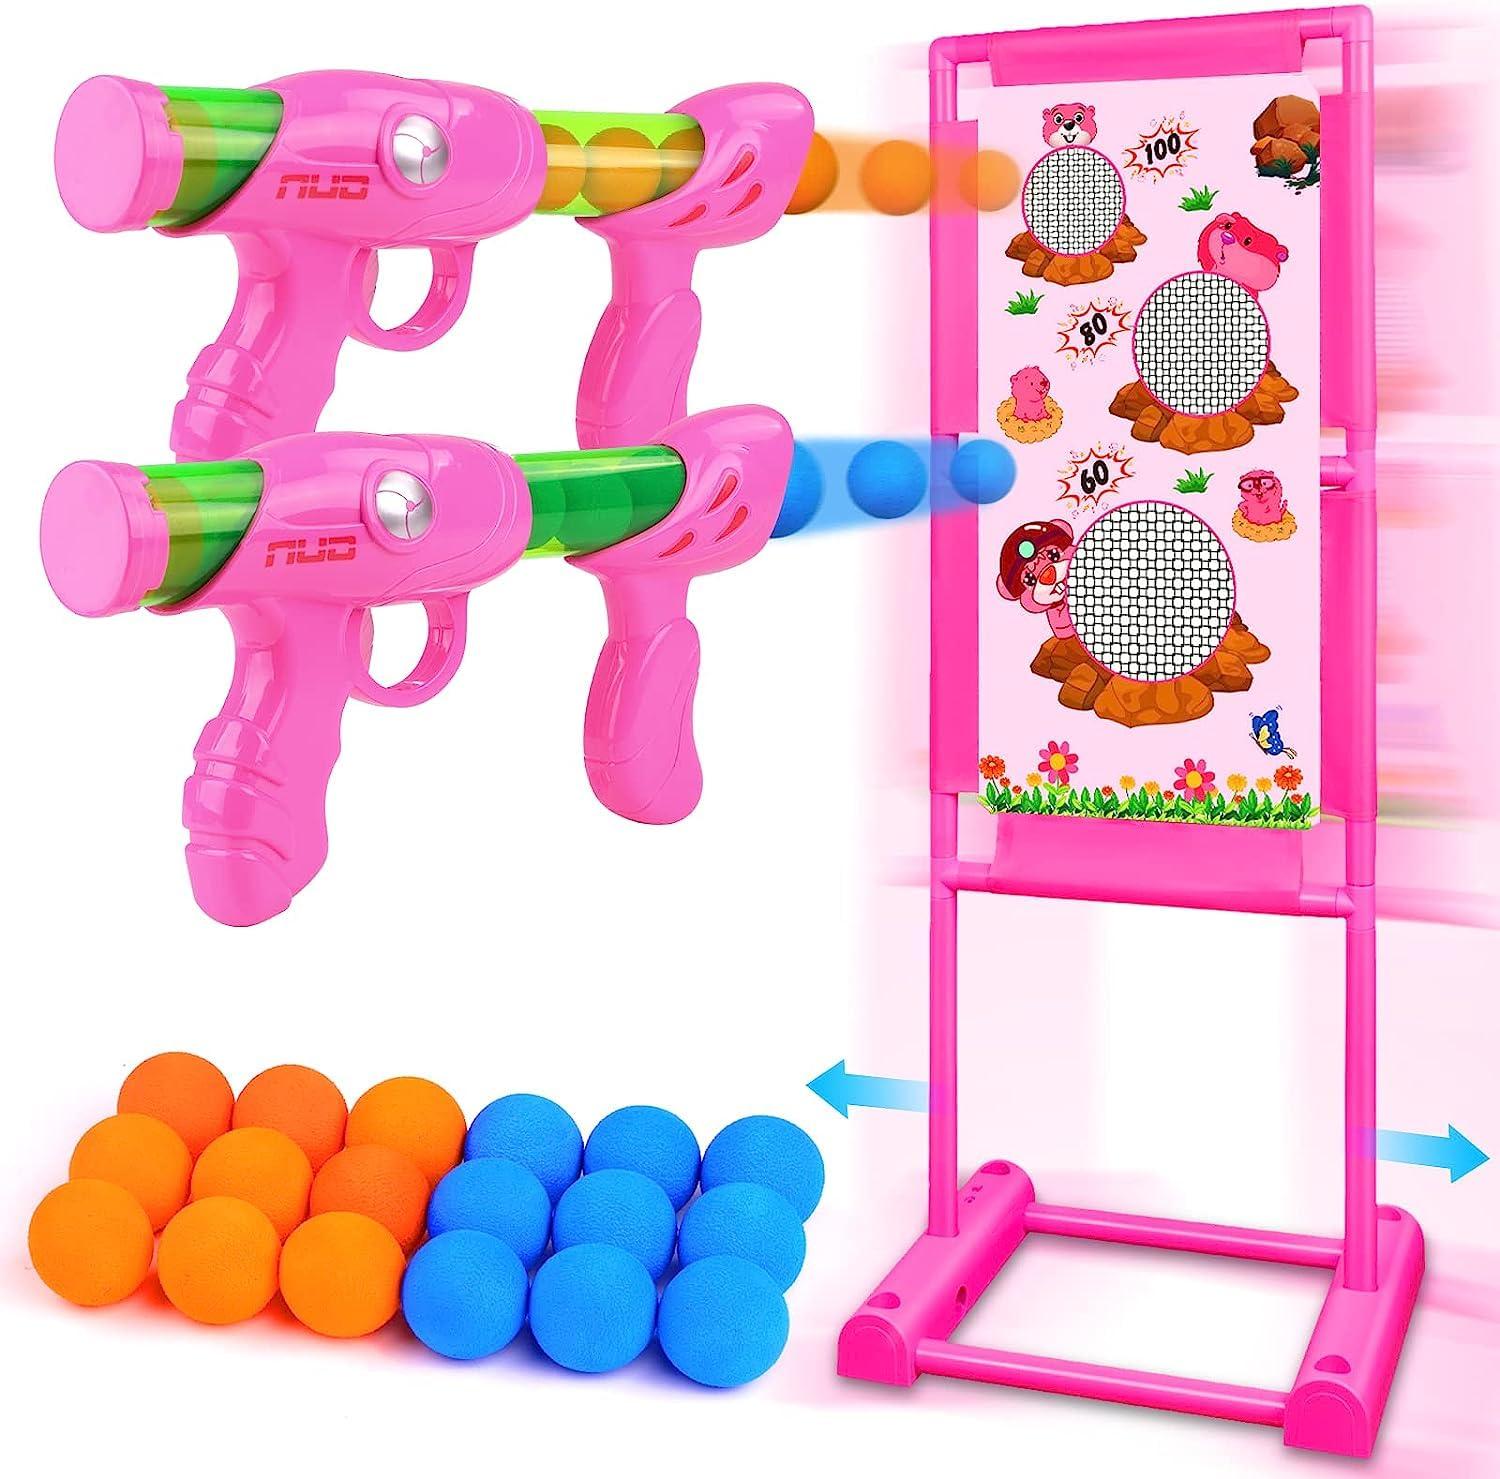 M&LD Moving Shooting Targets Game Electric Scoring Target Kids Toy with 2 Popper Guns 18 Foam Balls Outdoor Garden Toys Gifts for Boys Girls 110 x 42cm(Hot Pink)